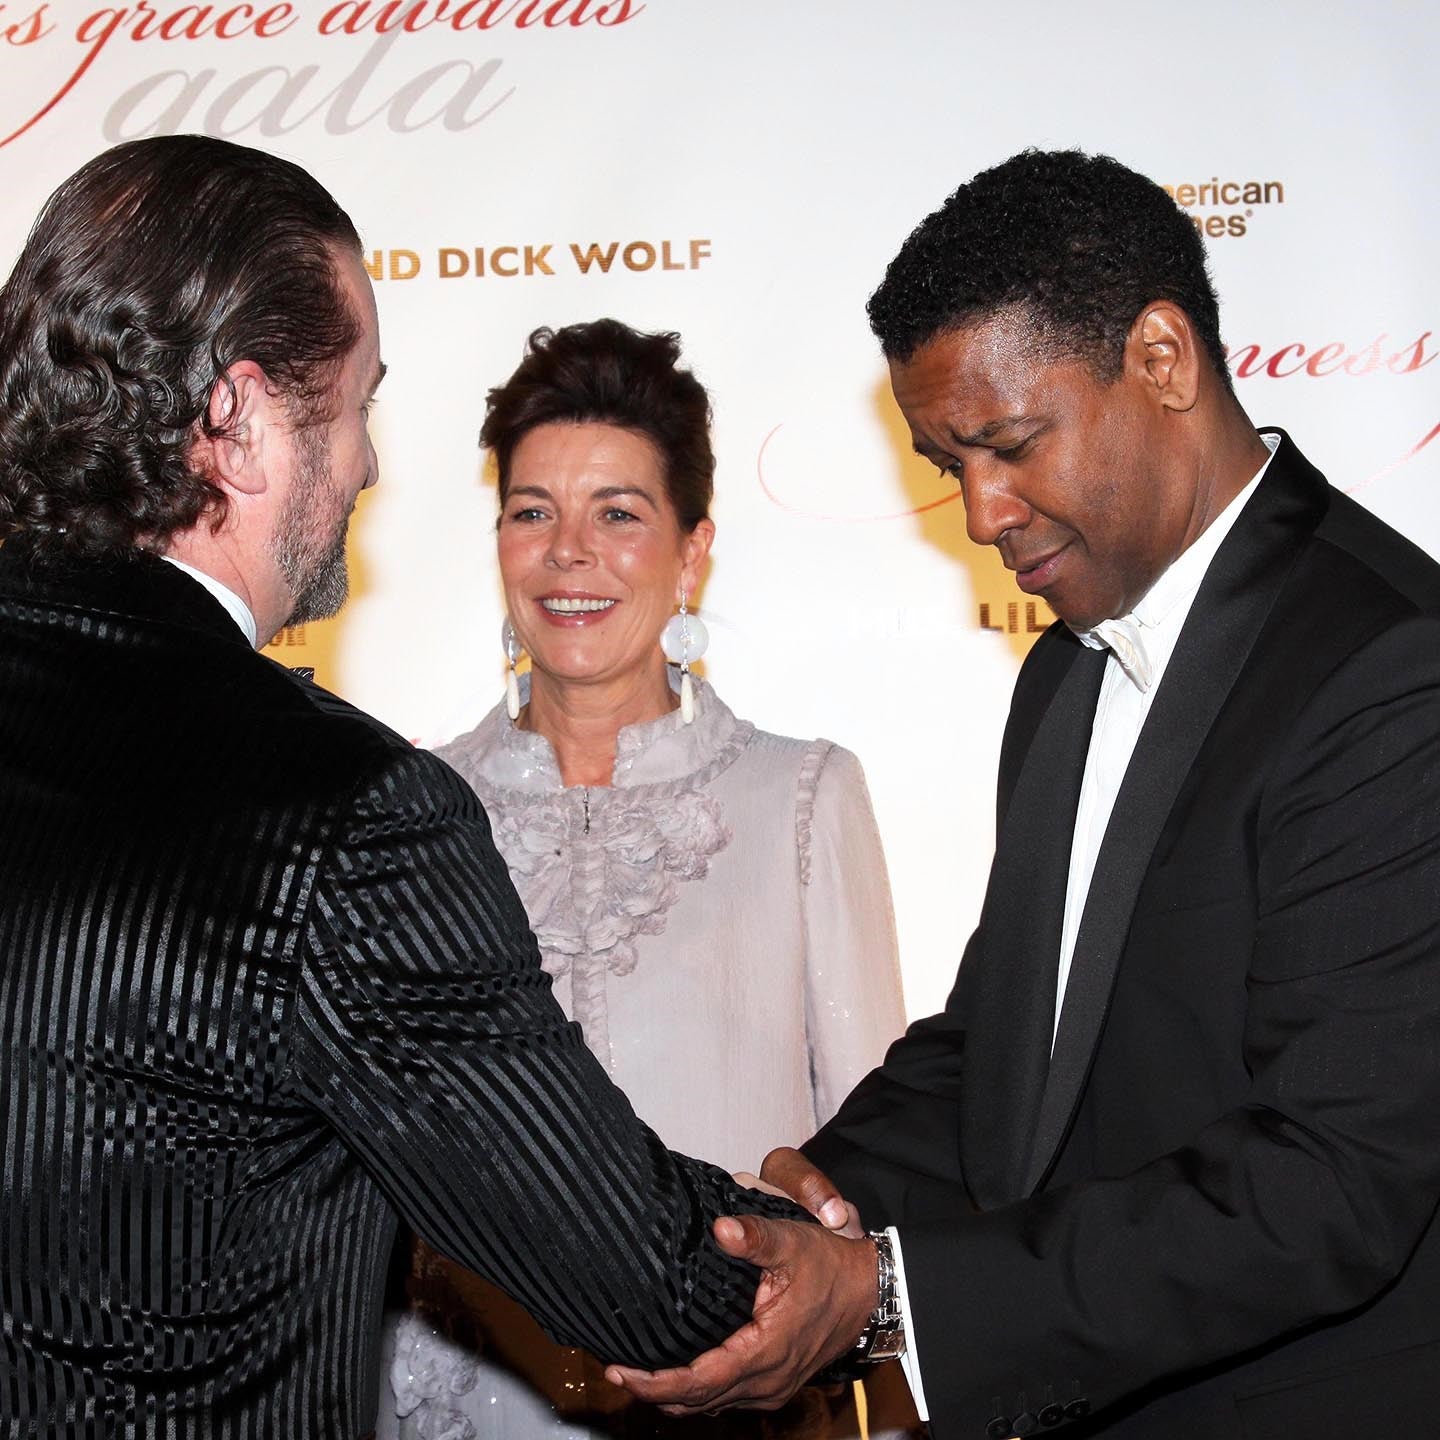 Alex Soldier and Princess Caroline of Hanover present Denzel Washington with the Princess Grace Award, designed and created by Alex Soldier.